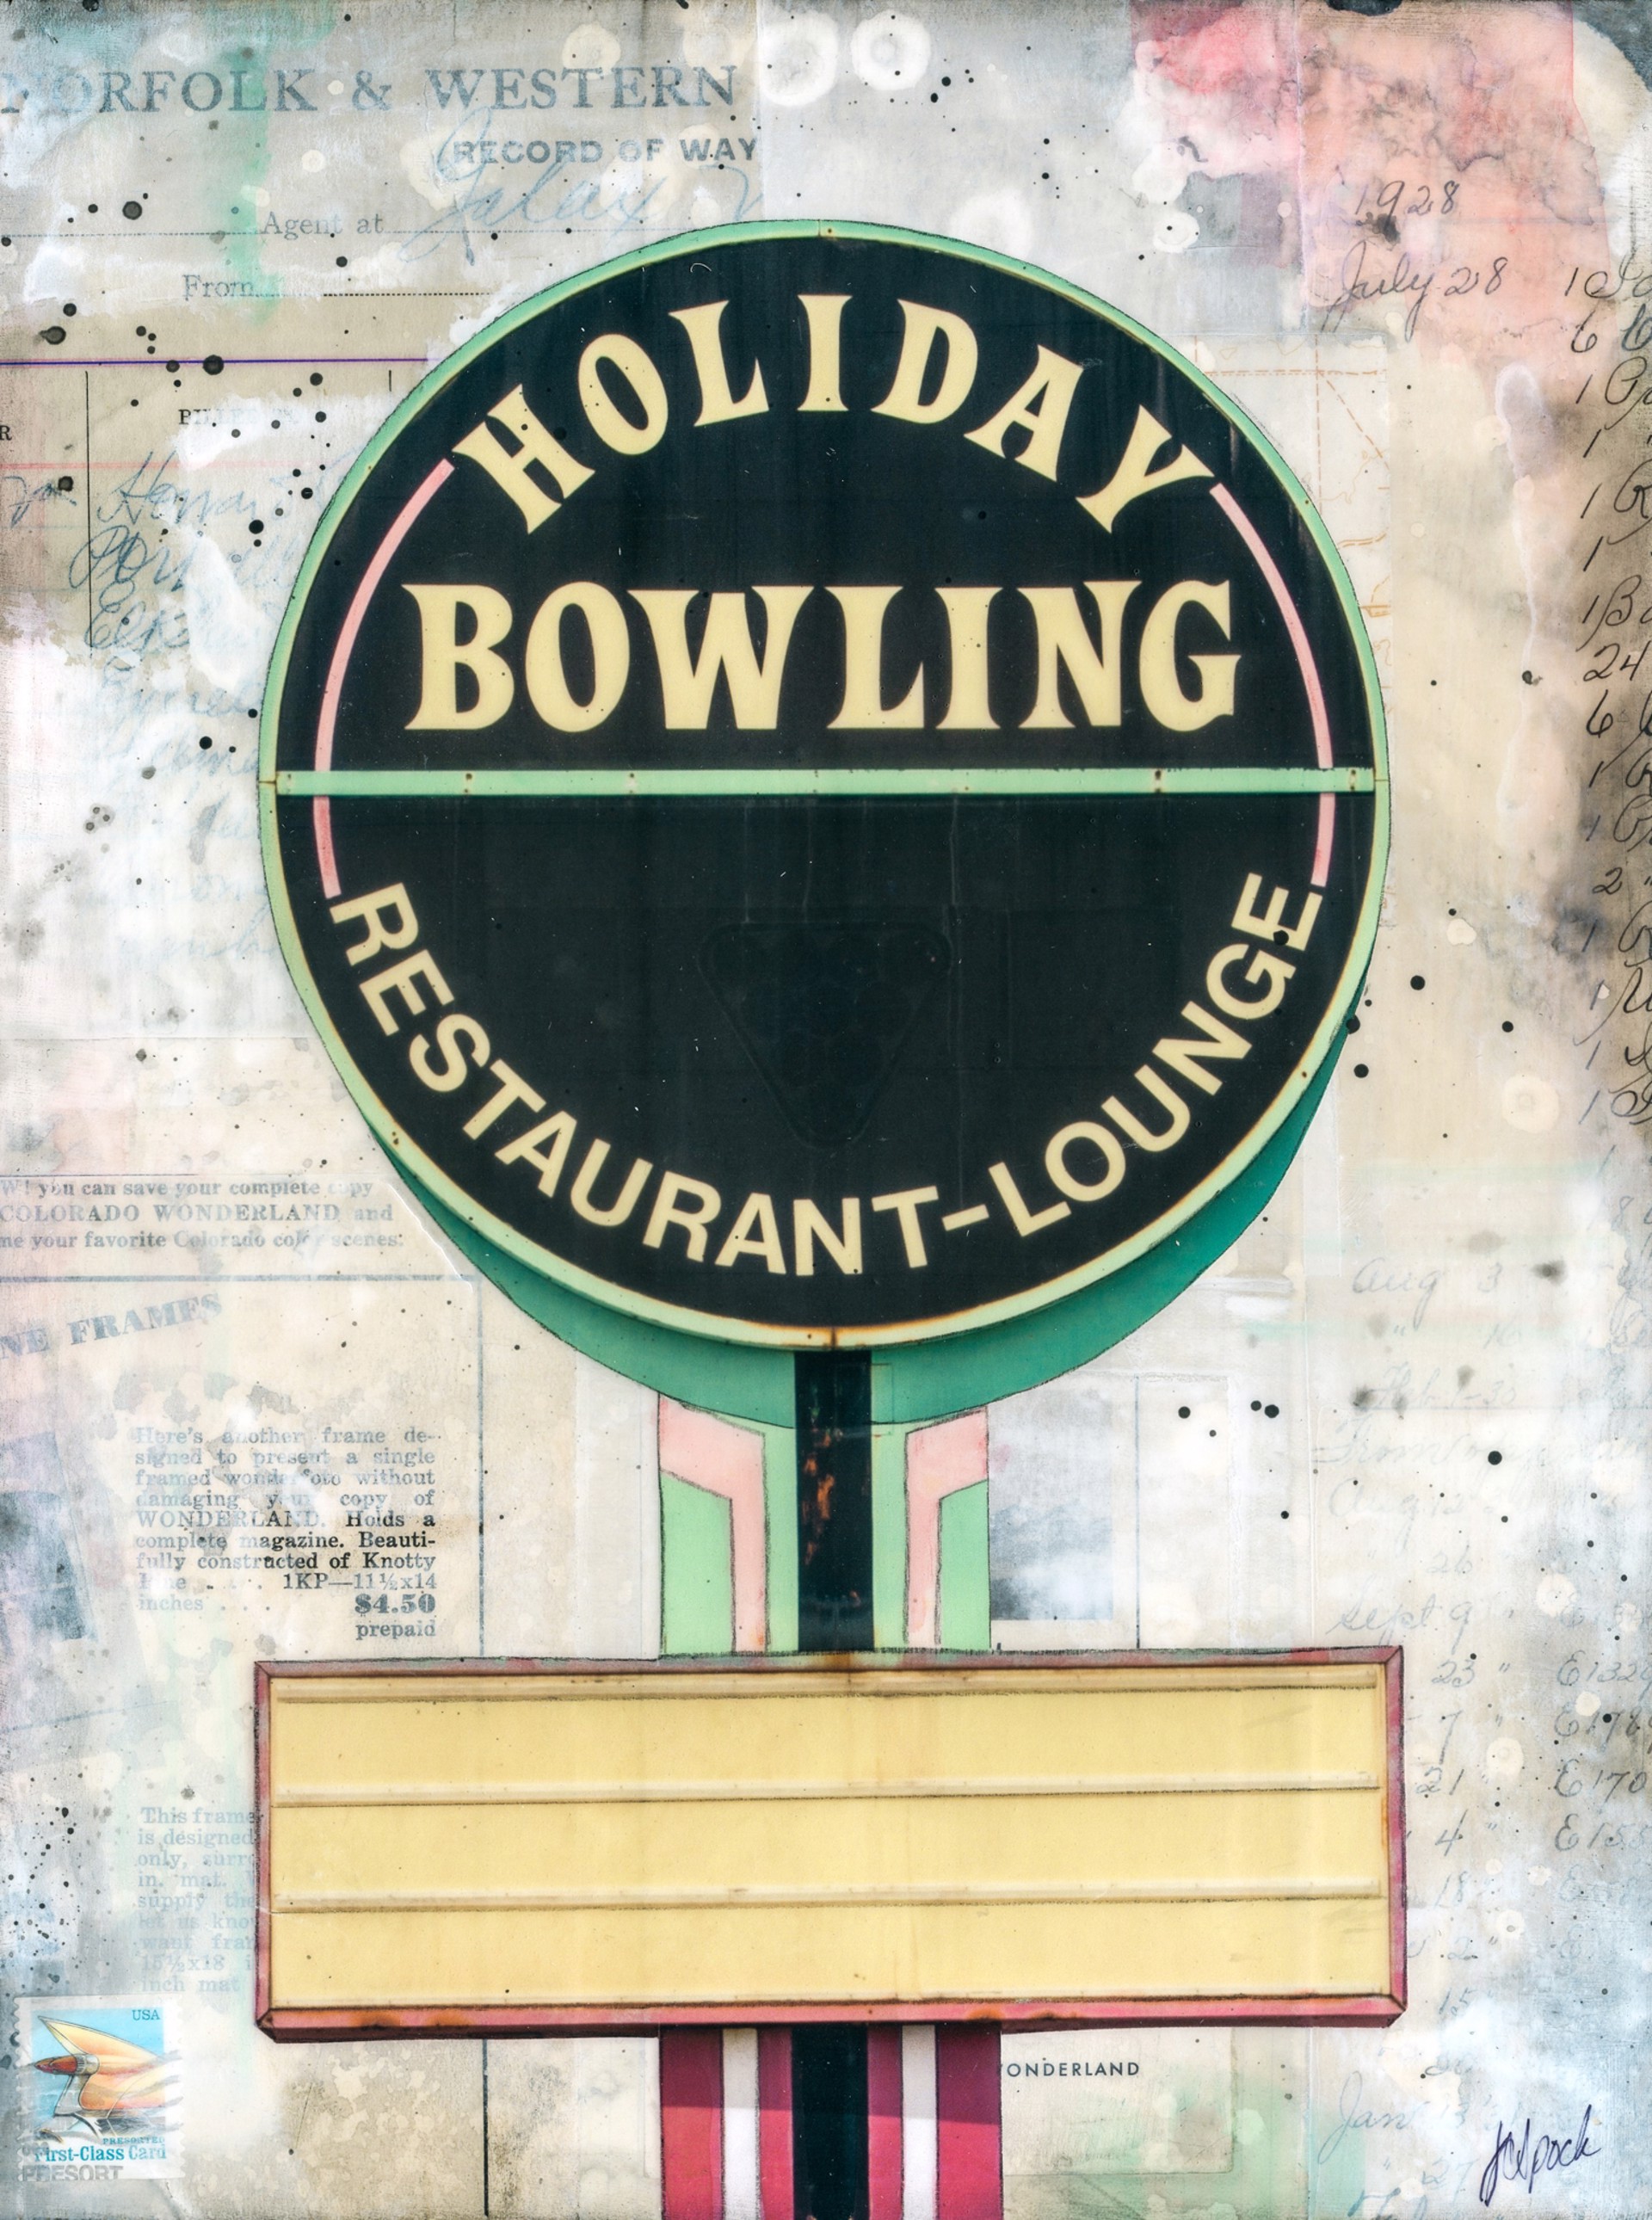 Holiday Bowling by JC Spock